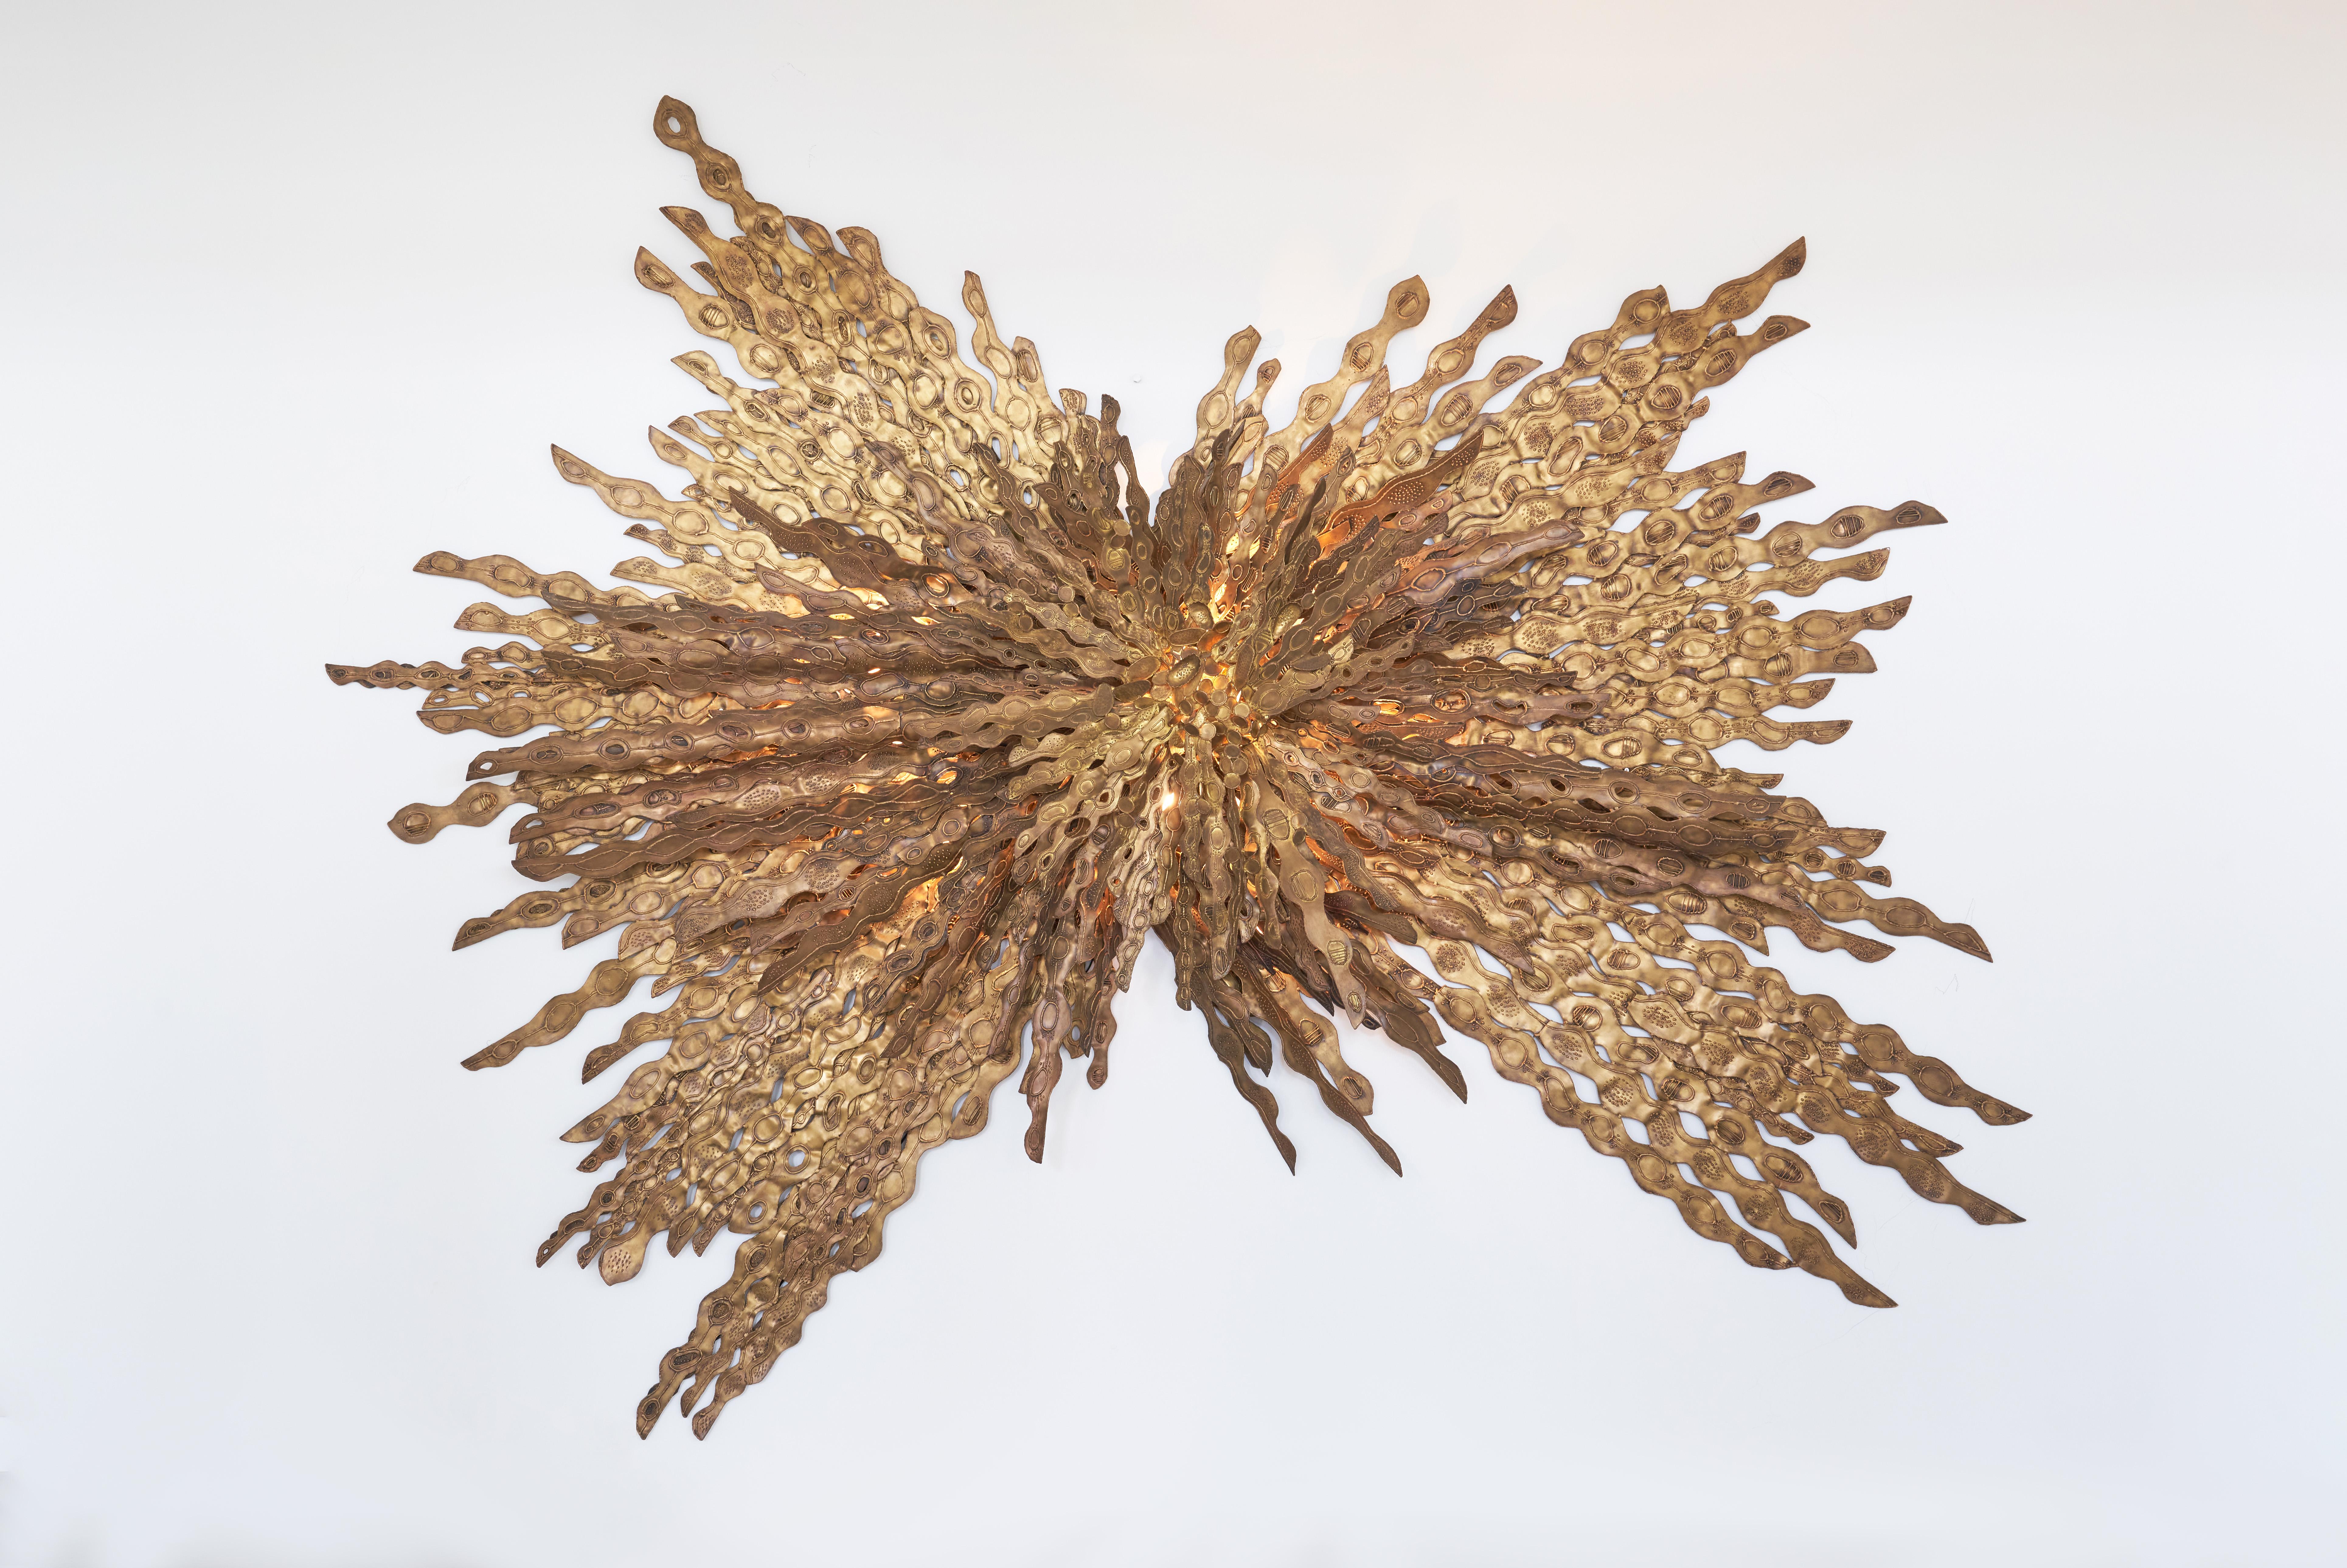 Each piece of metal that comes together to make this patinated-gold sconce is painstakingly cut and welded together through meticulous artisan handcrafting. The careful detailing of each sunray of brass allows for the light to disperse and cast a